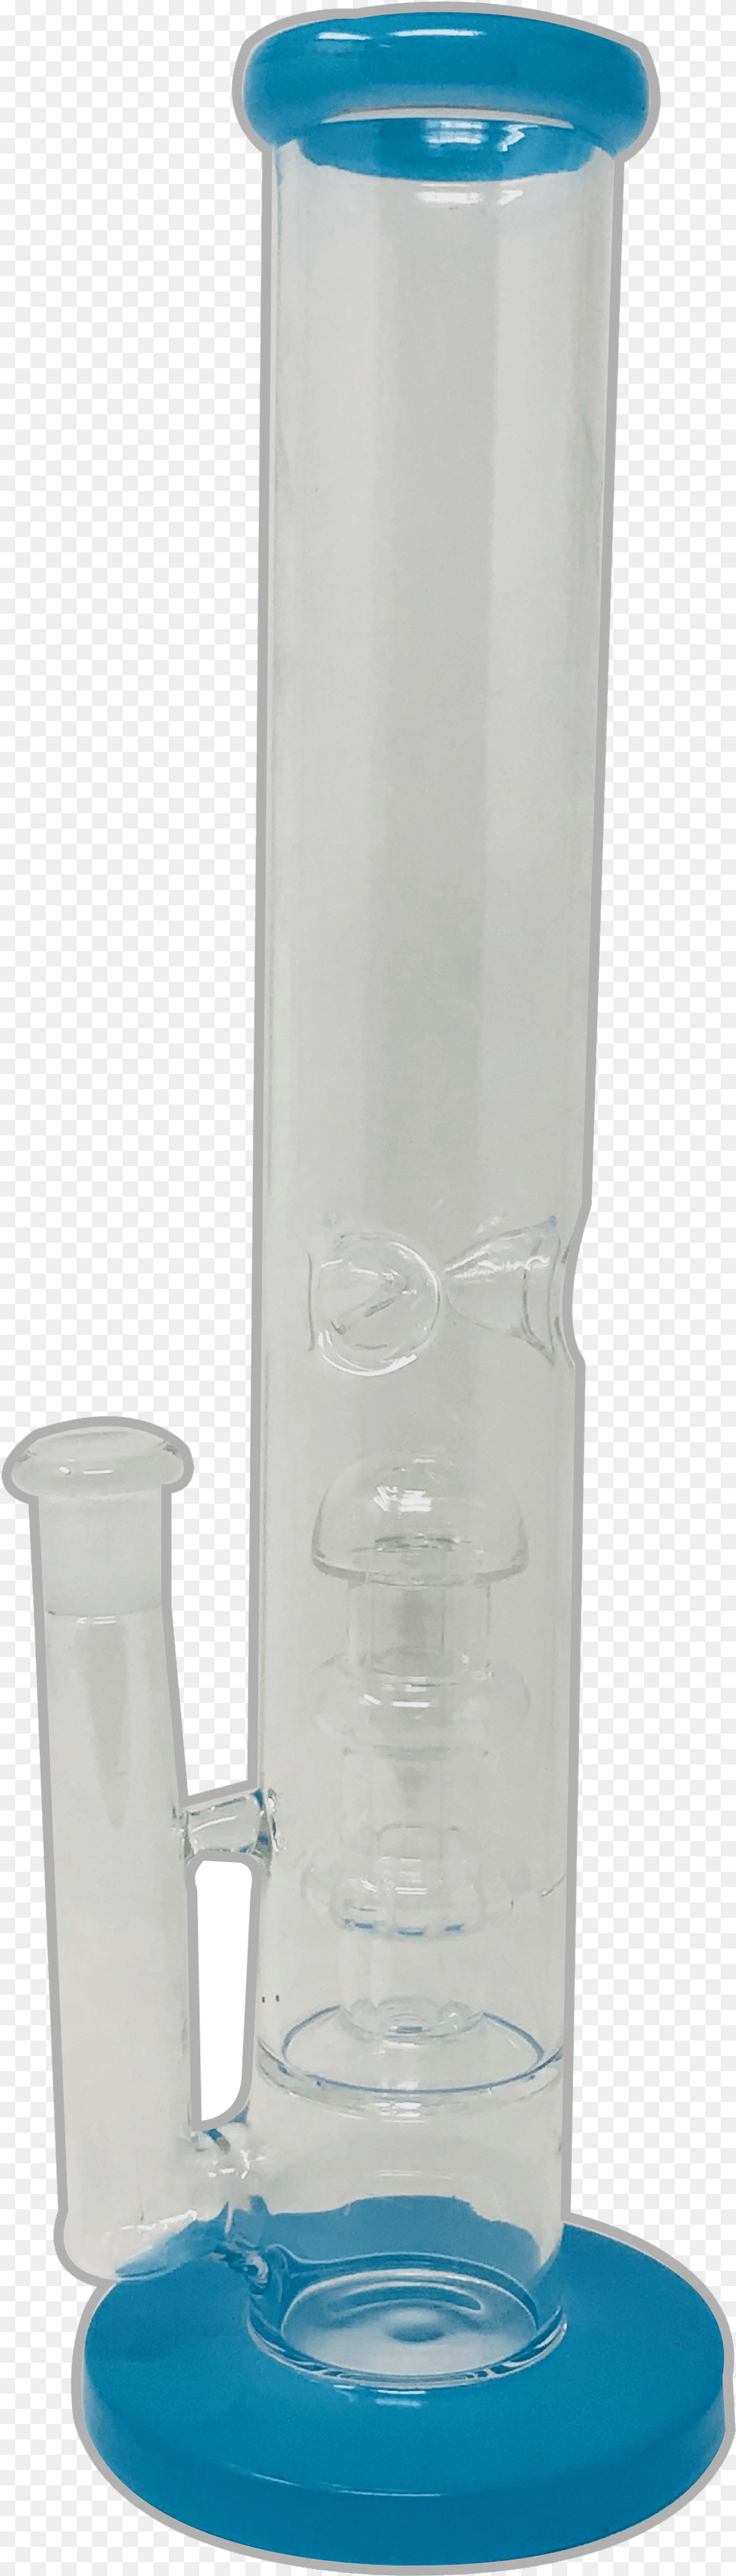 Straight Perc Bong Pint Glass, Cup, Cylinder, Jar, Smoke Pipe Png Image